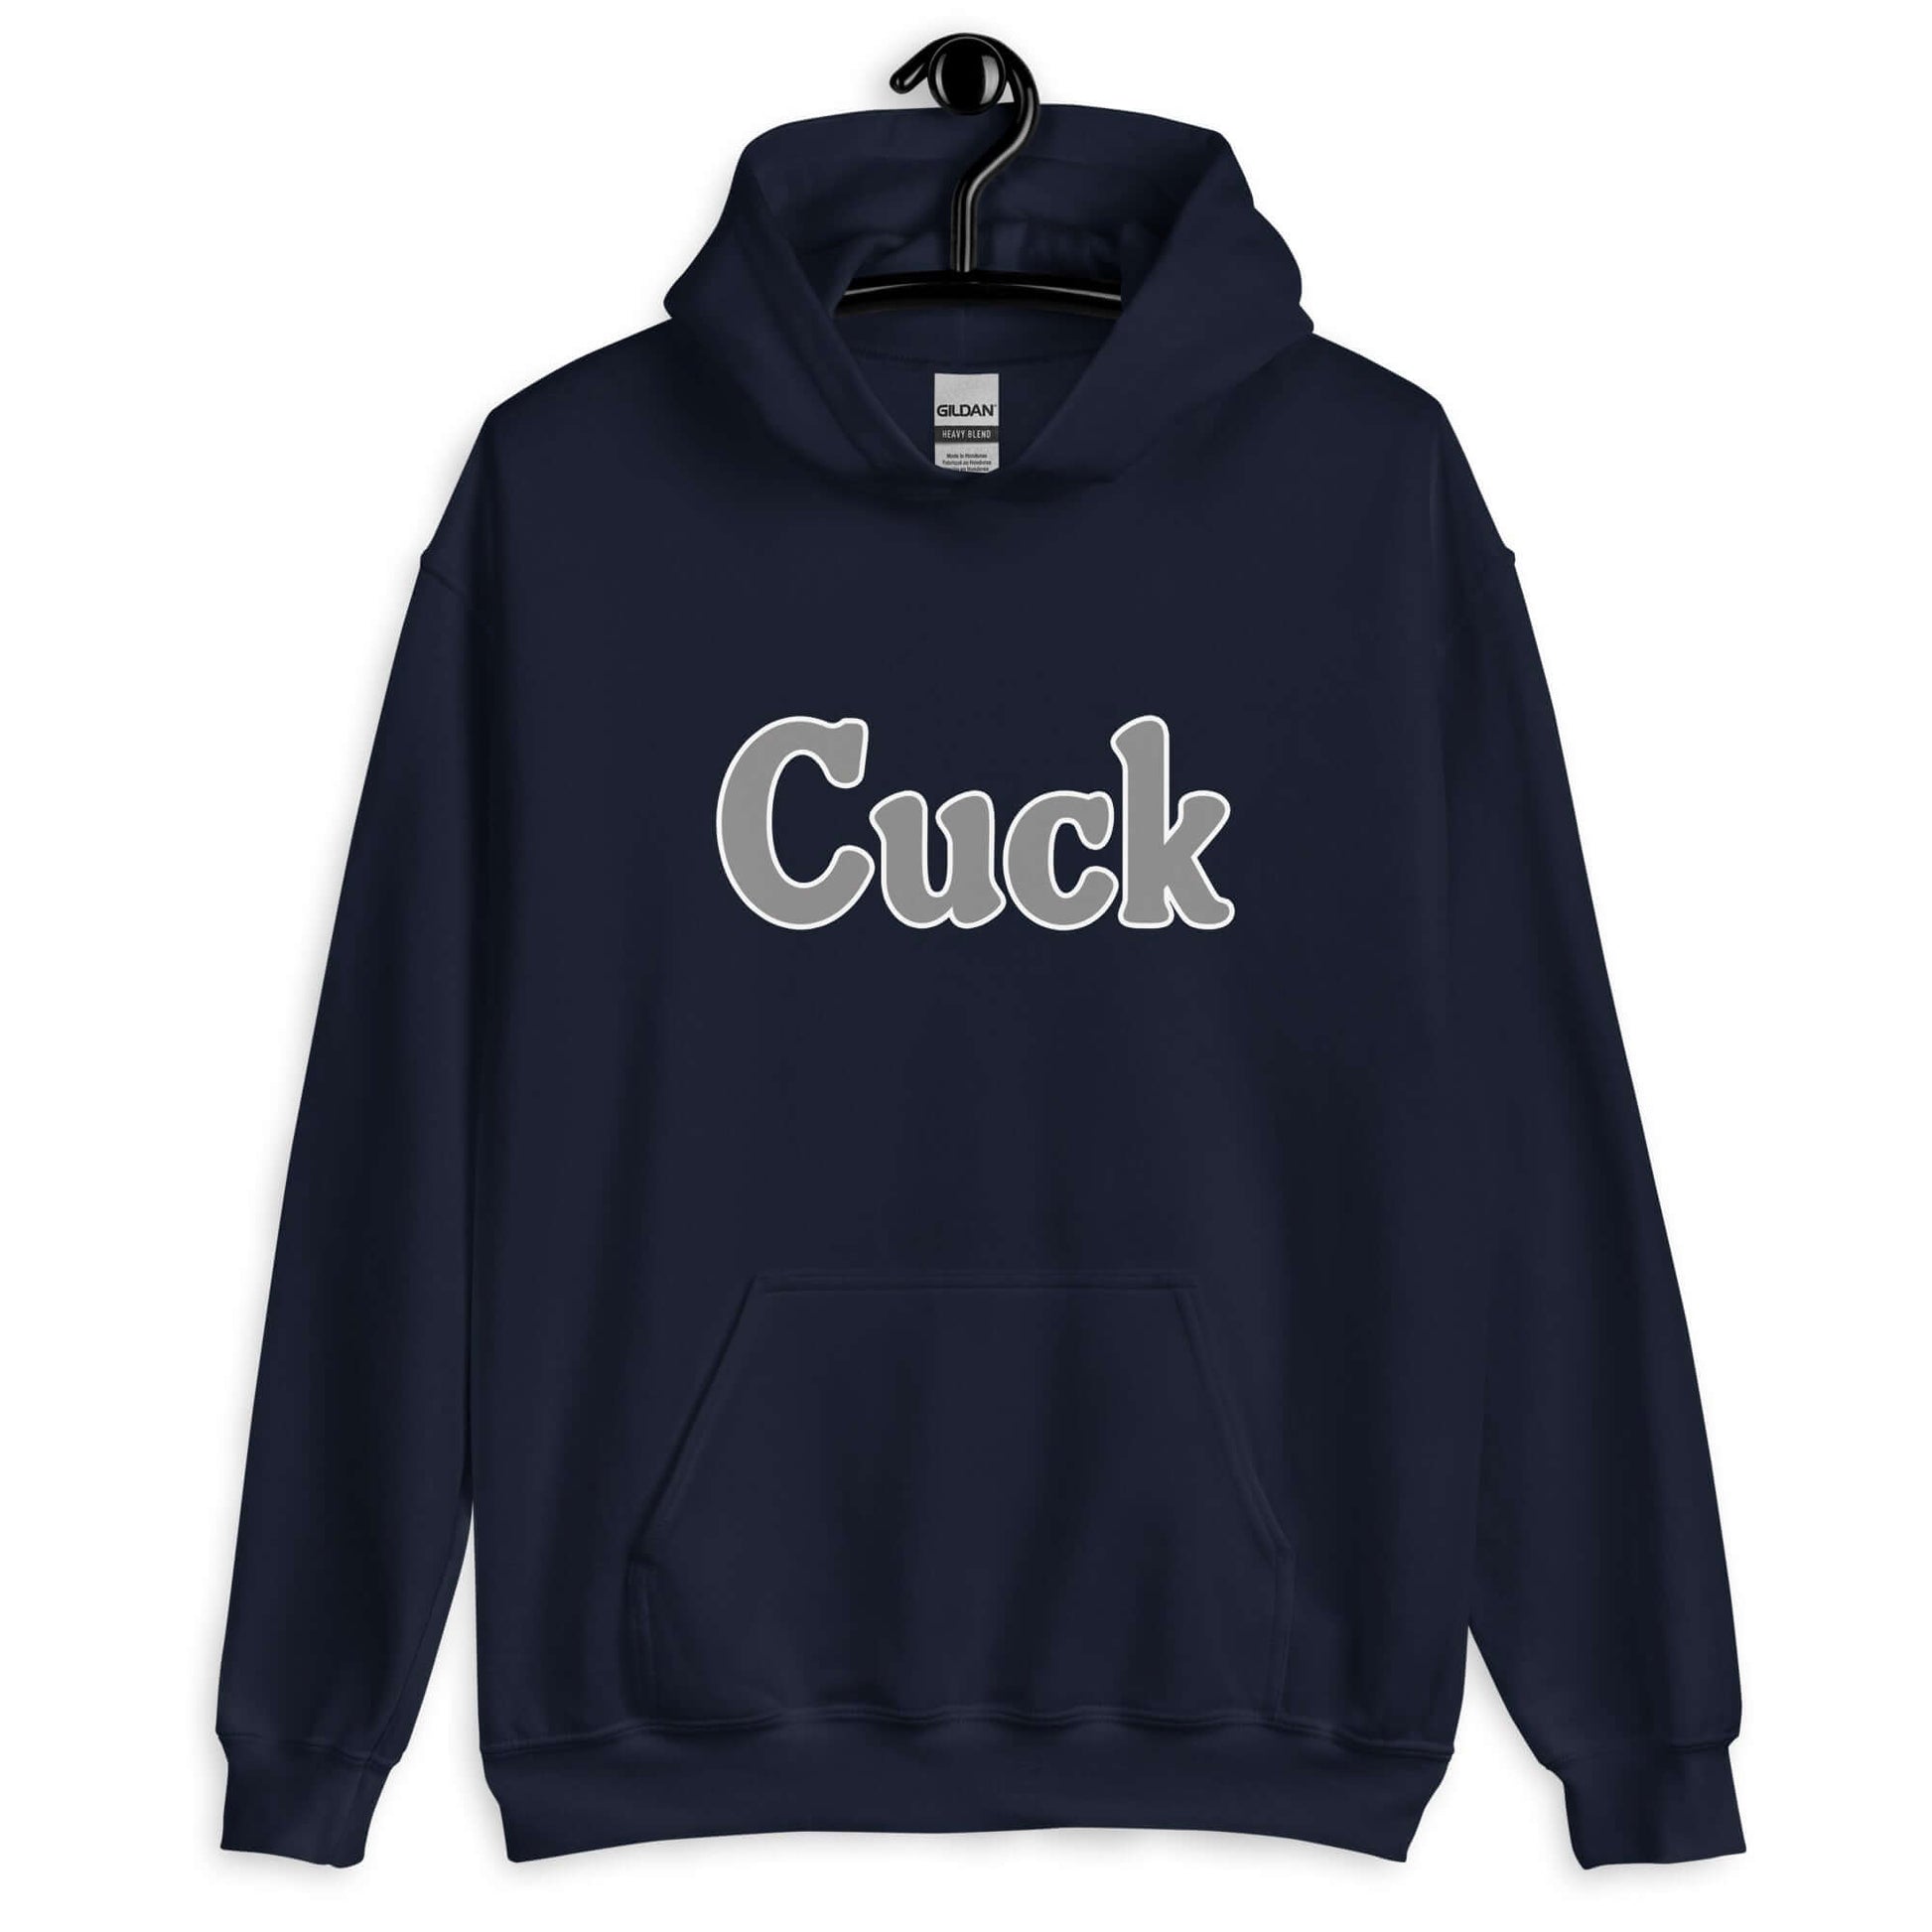 Navy blue hoodie sweatshirt with the word Cuck printed on the front in grey.